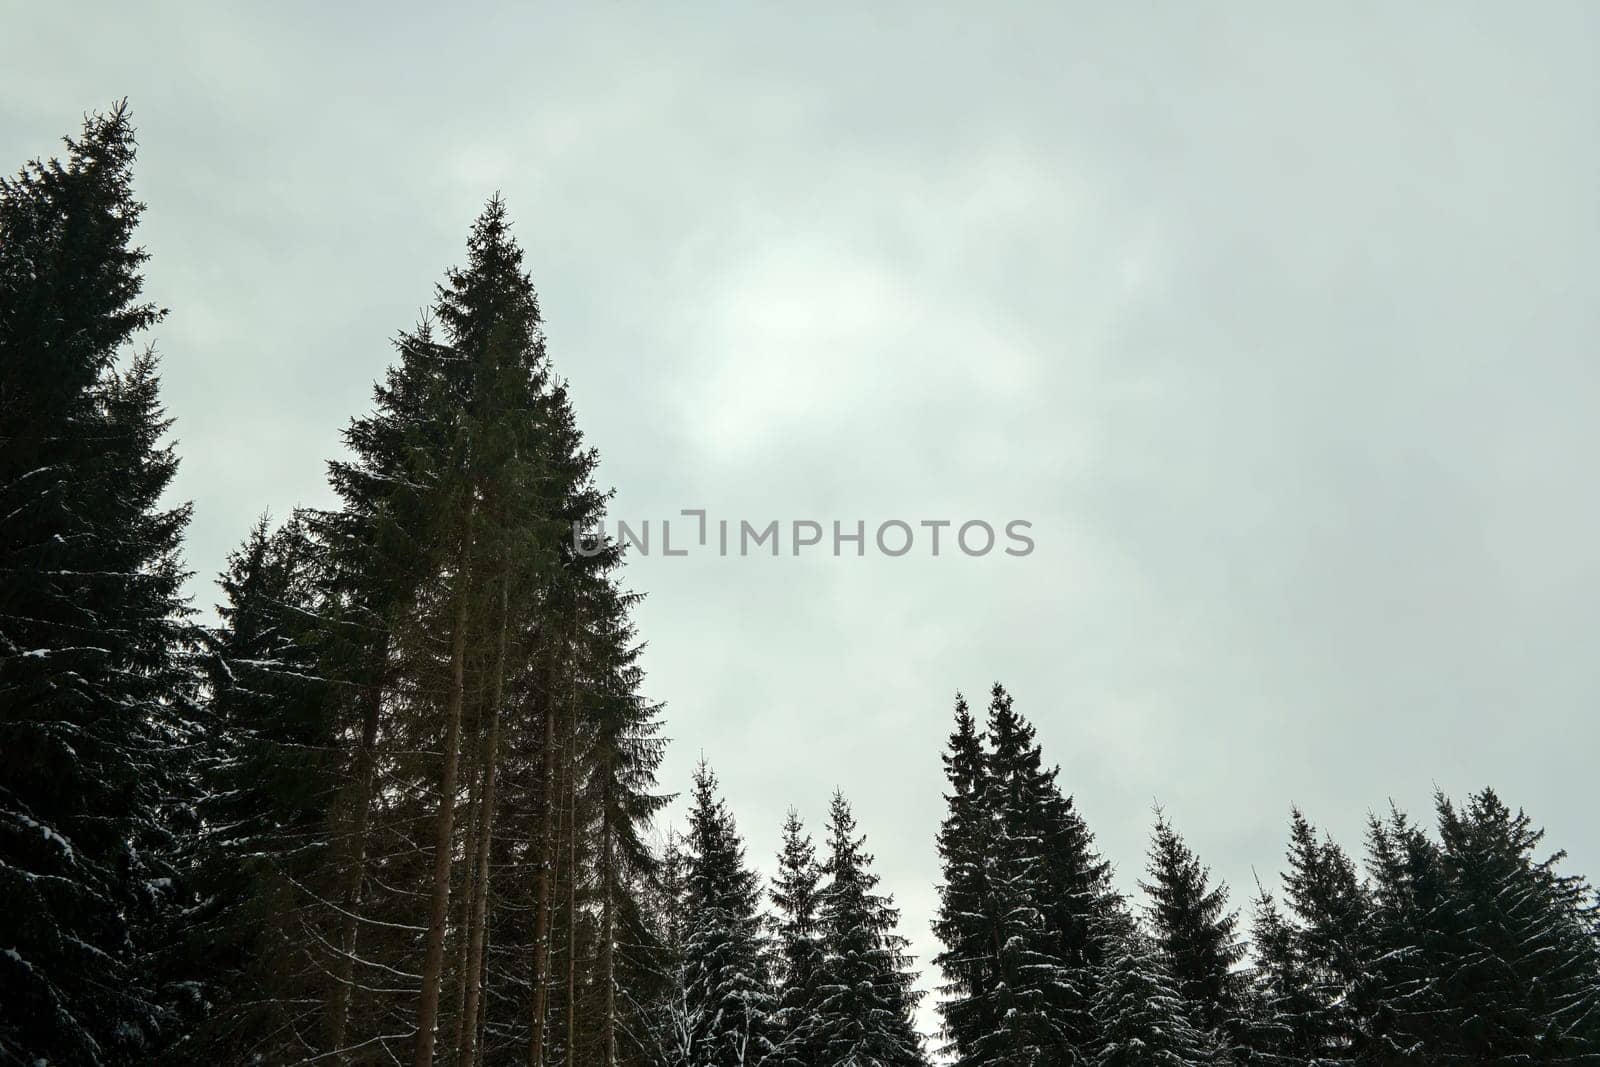 Coniferous tree tops with little snow, against gray overcast sky (space for text), typical bleak winter day in forest.